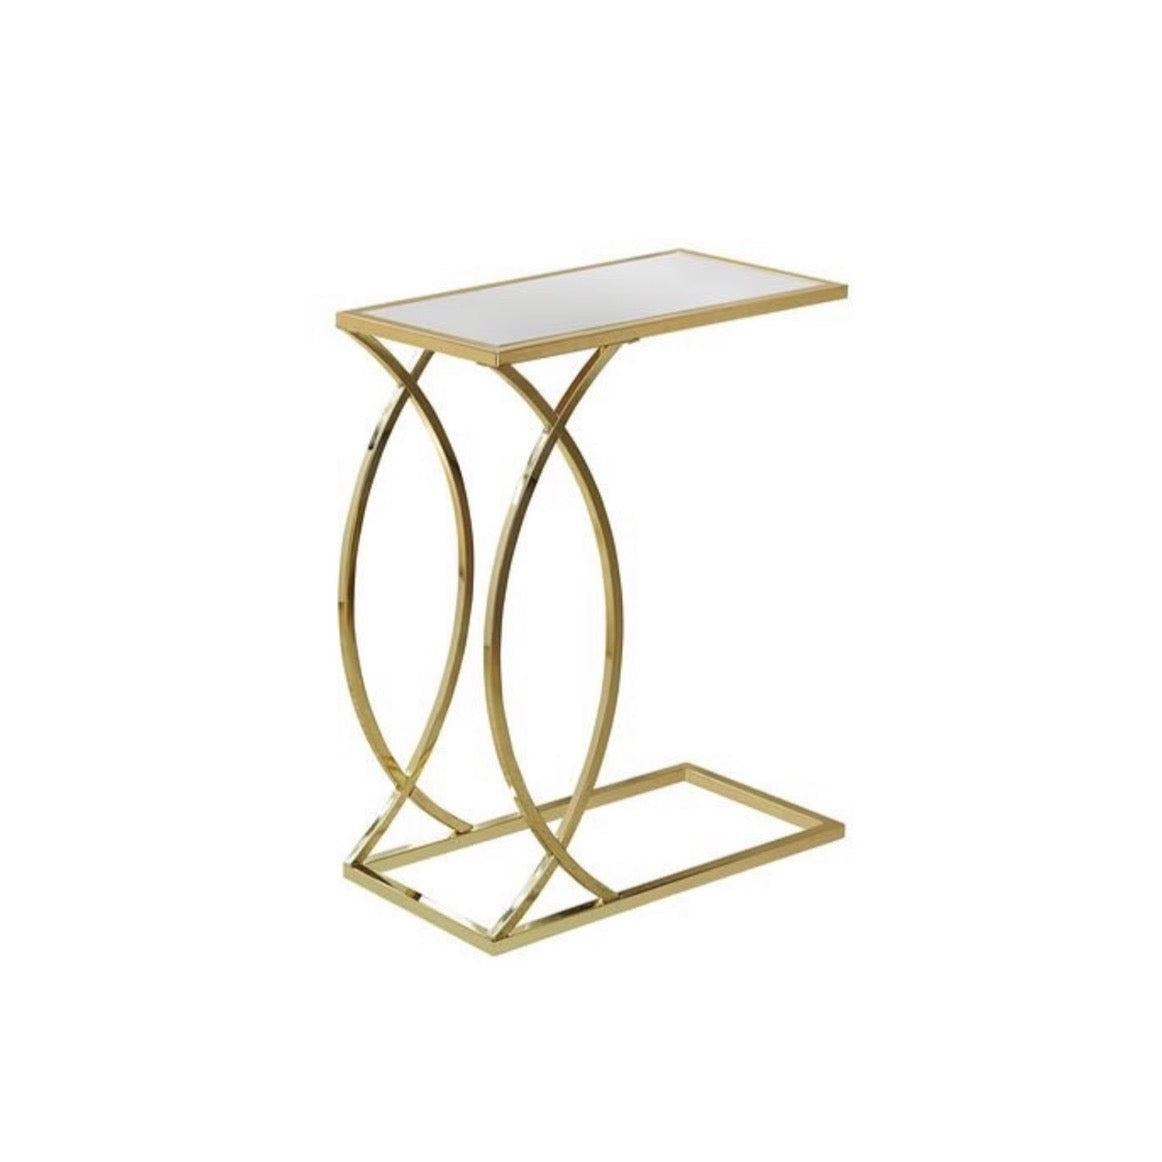 BELLA GOLD ACCENT TABLE